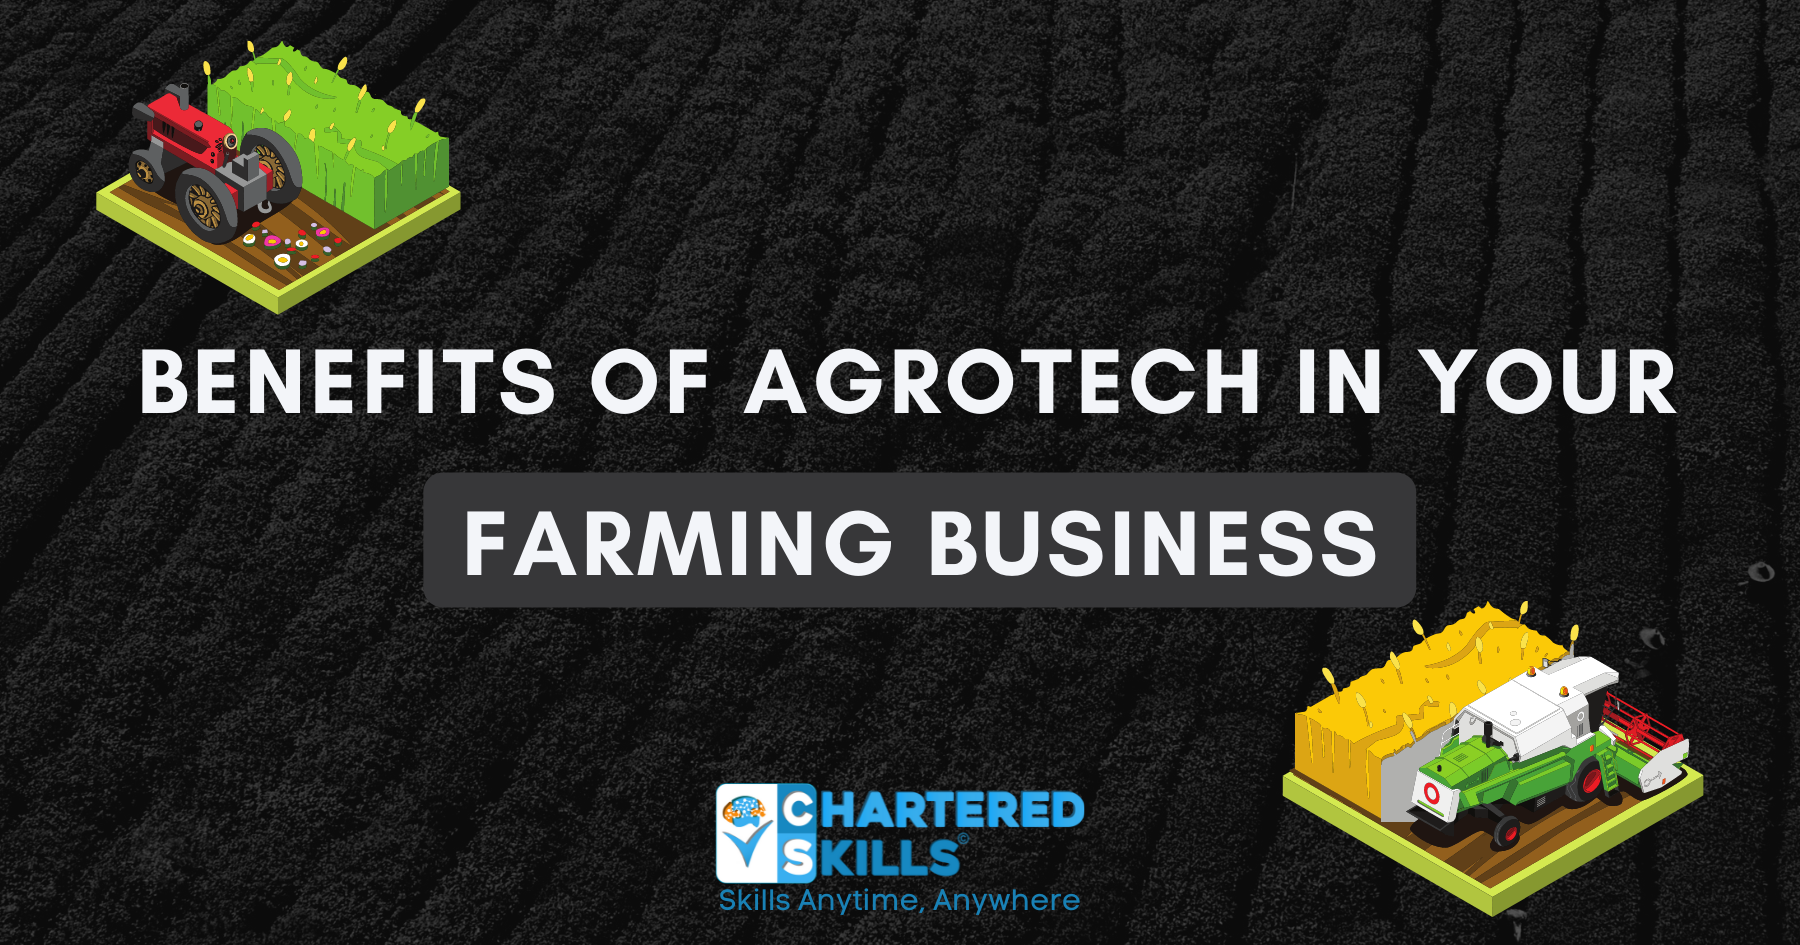 Benefits of agrotech in your farming